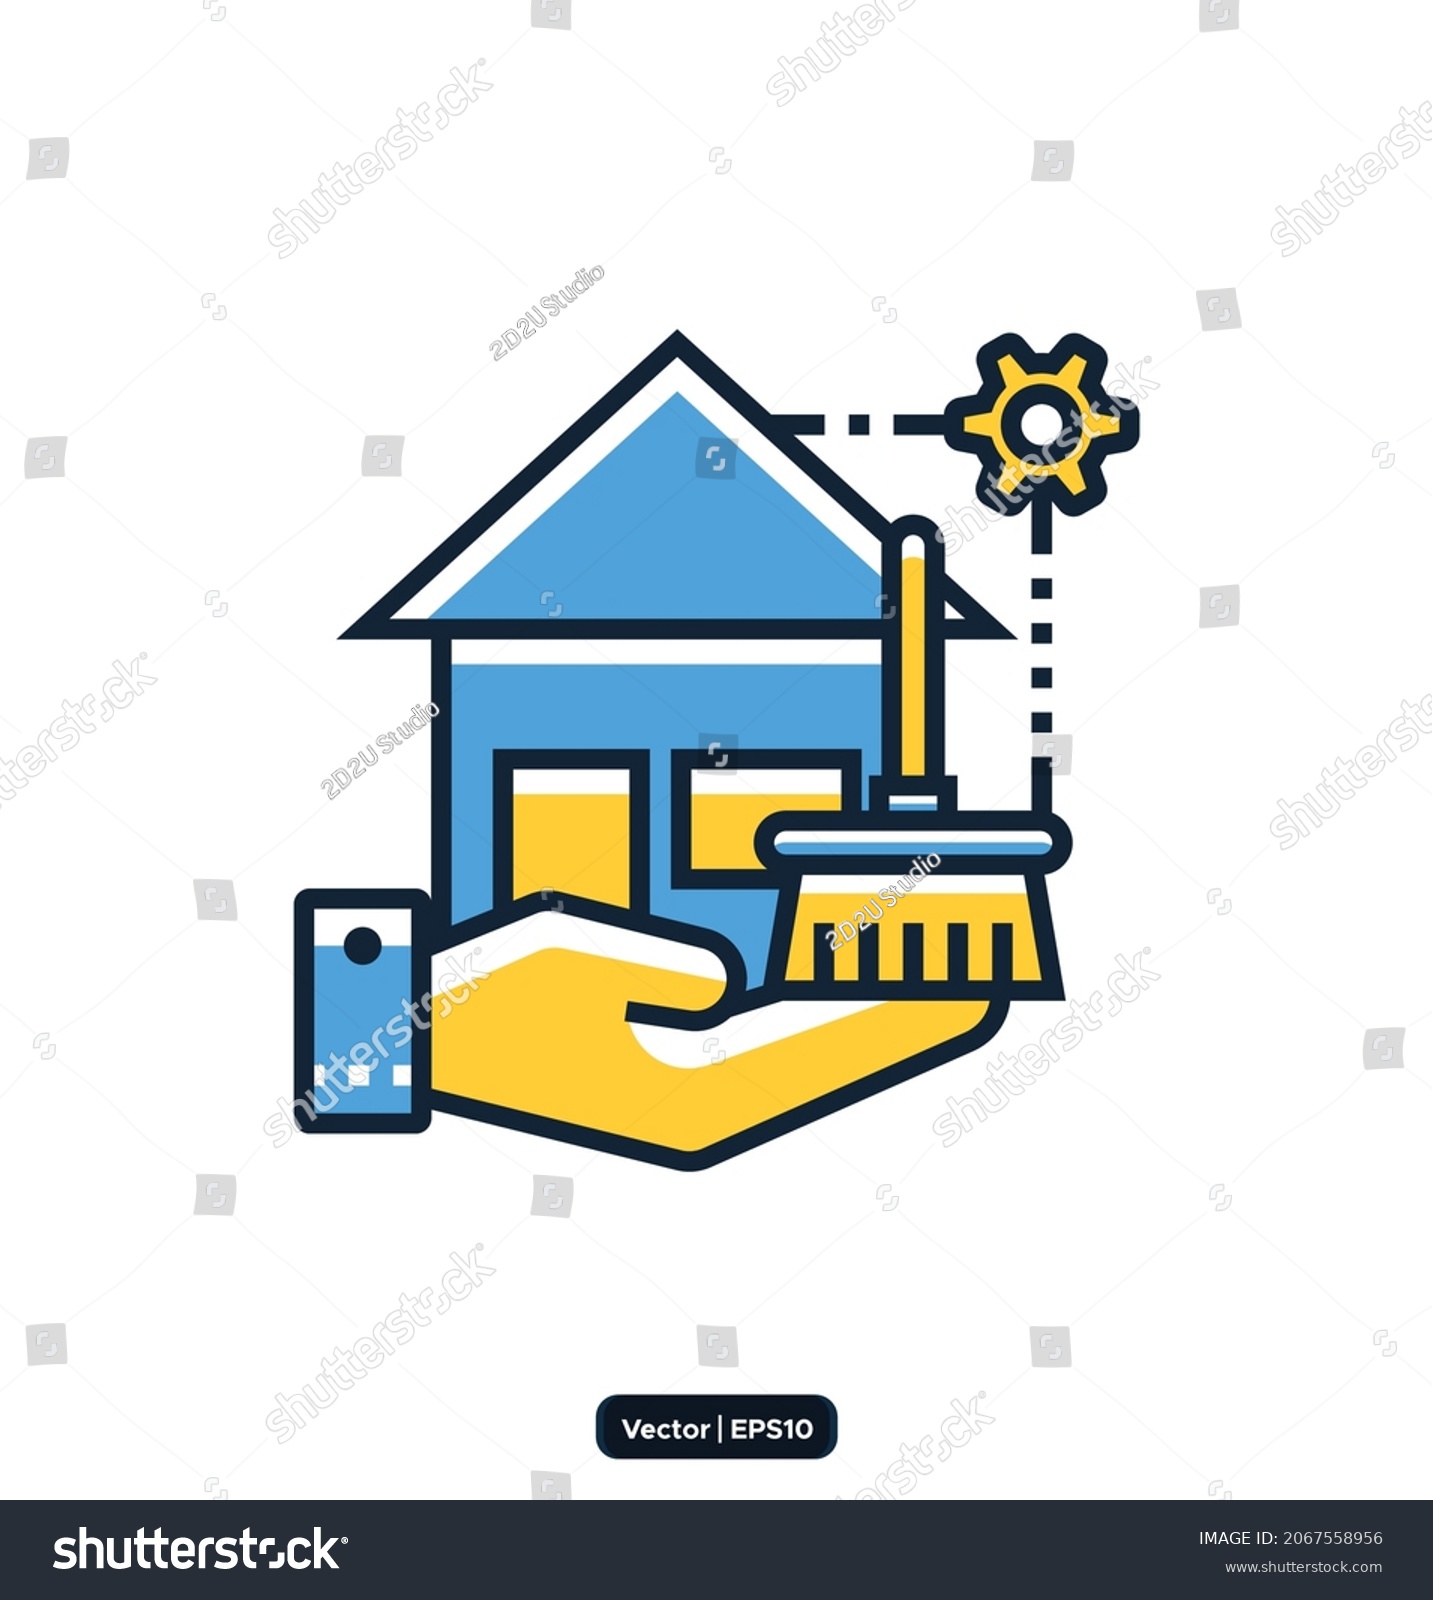 SVG of Airbnb Cleaning icon. Disinfection and Cleaning Related Vector Icons. Collection of linear simple web icons such as cleaner, disinfection, cleaning, washing, and others. vector eps10 svg